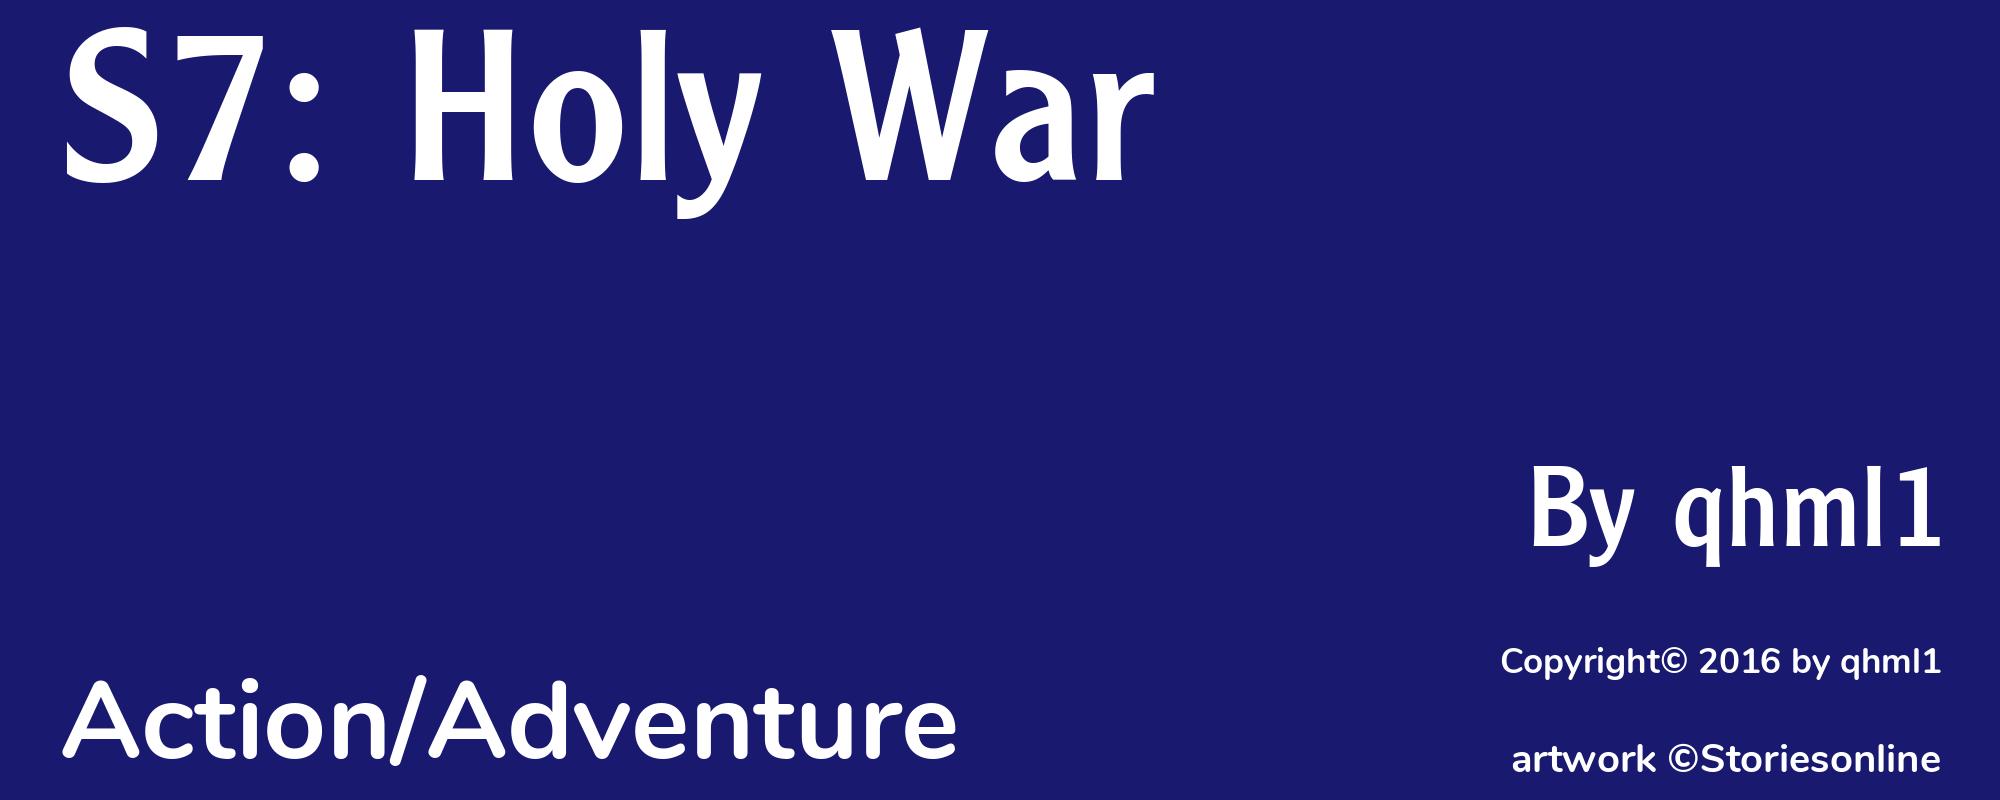 S7: Holy War - Cover